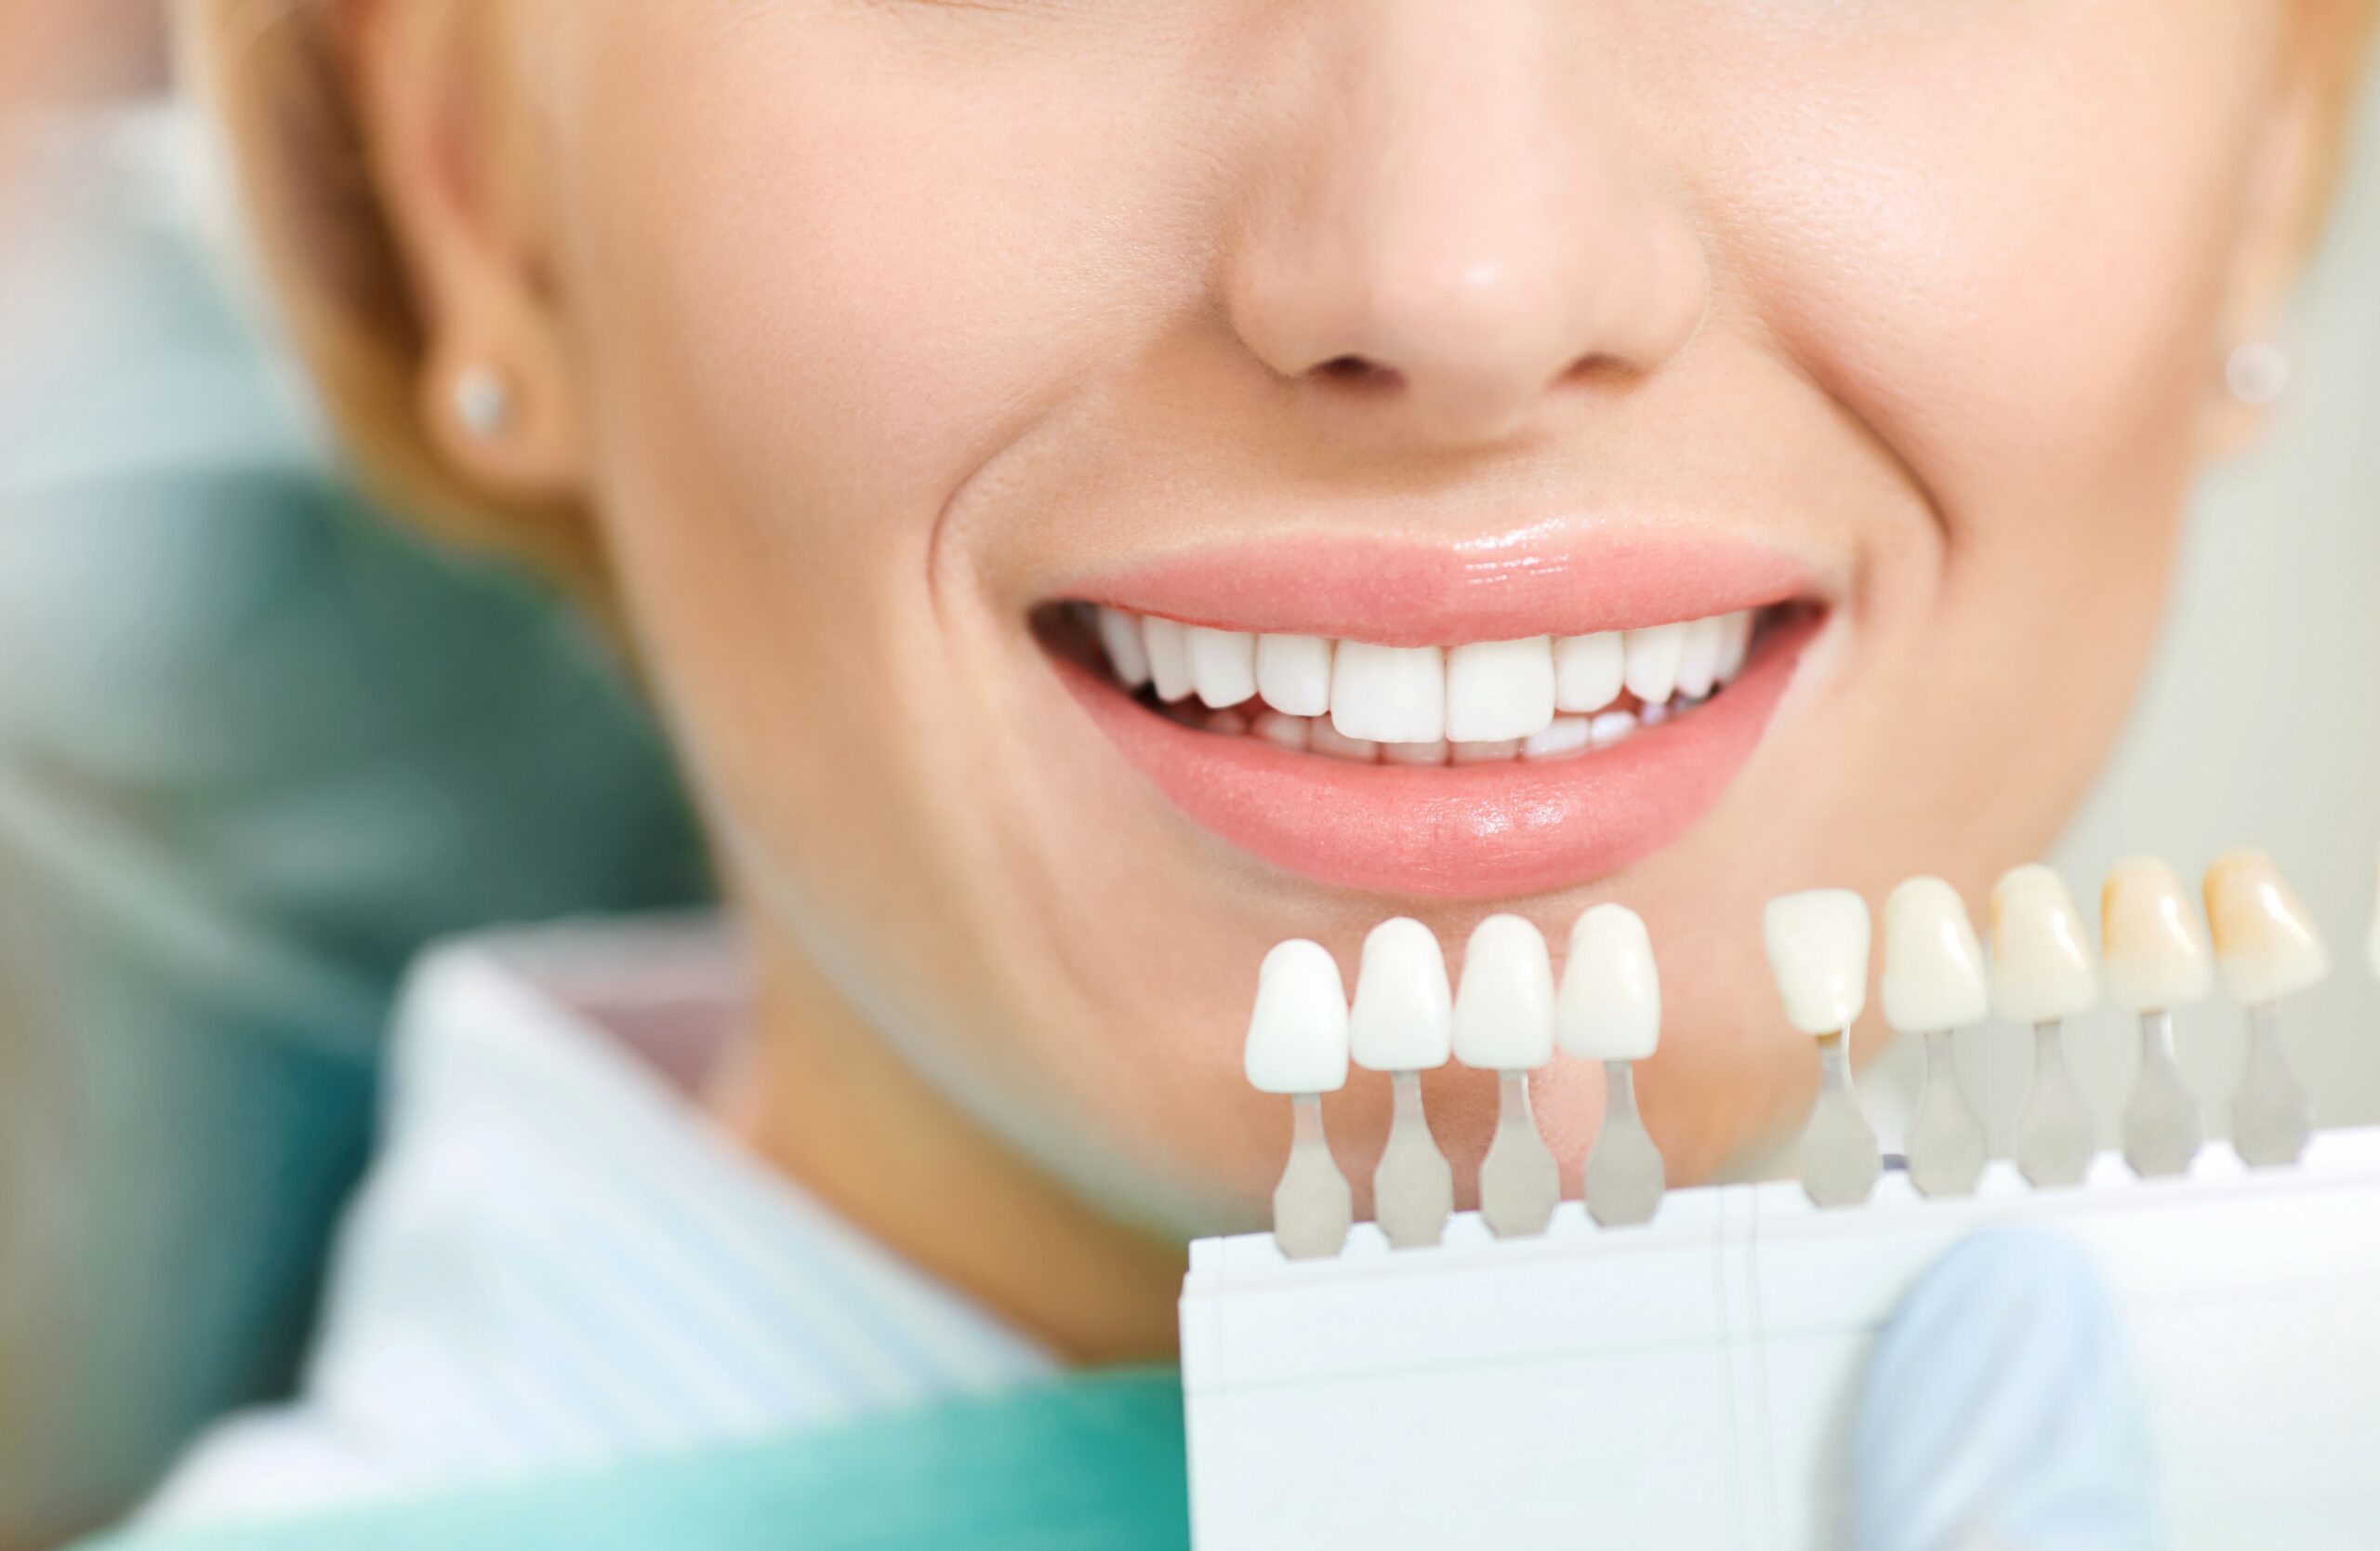 Teeth whitening dental clinic. Dentist selects the shade of the teeth to the patient waman with whitening samples.